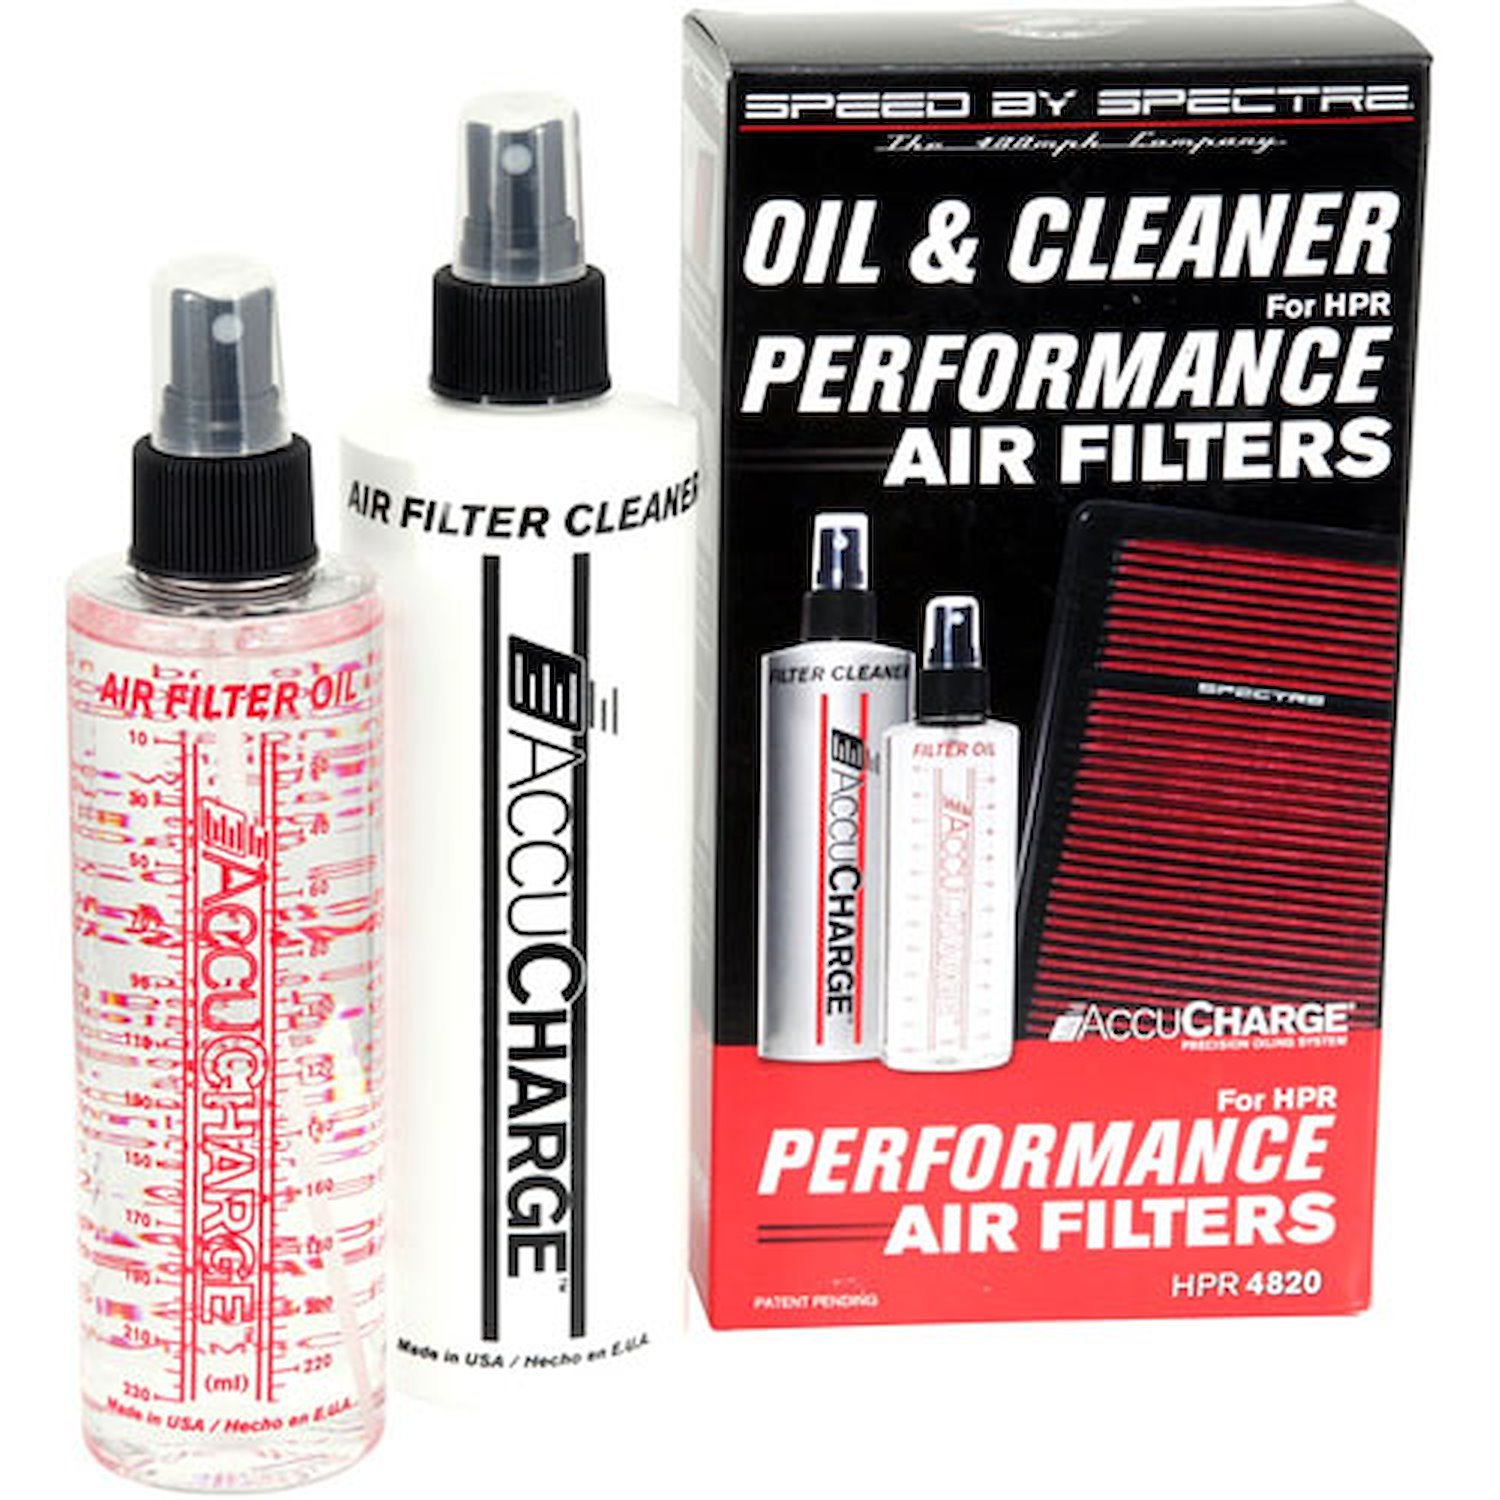 Accucharge Cleaning & Oiling System 12 oz Filter Cleaner